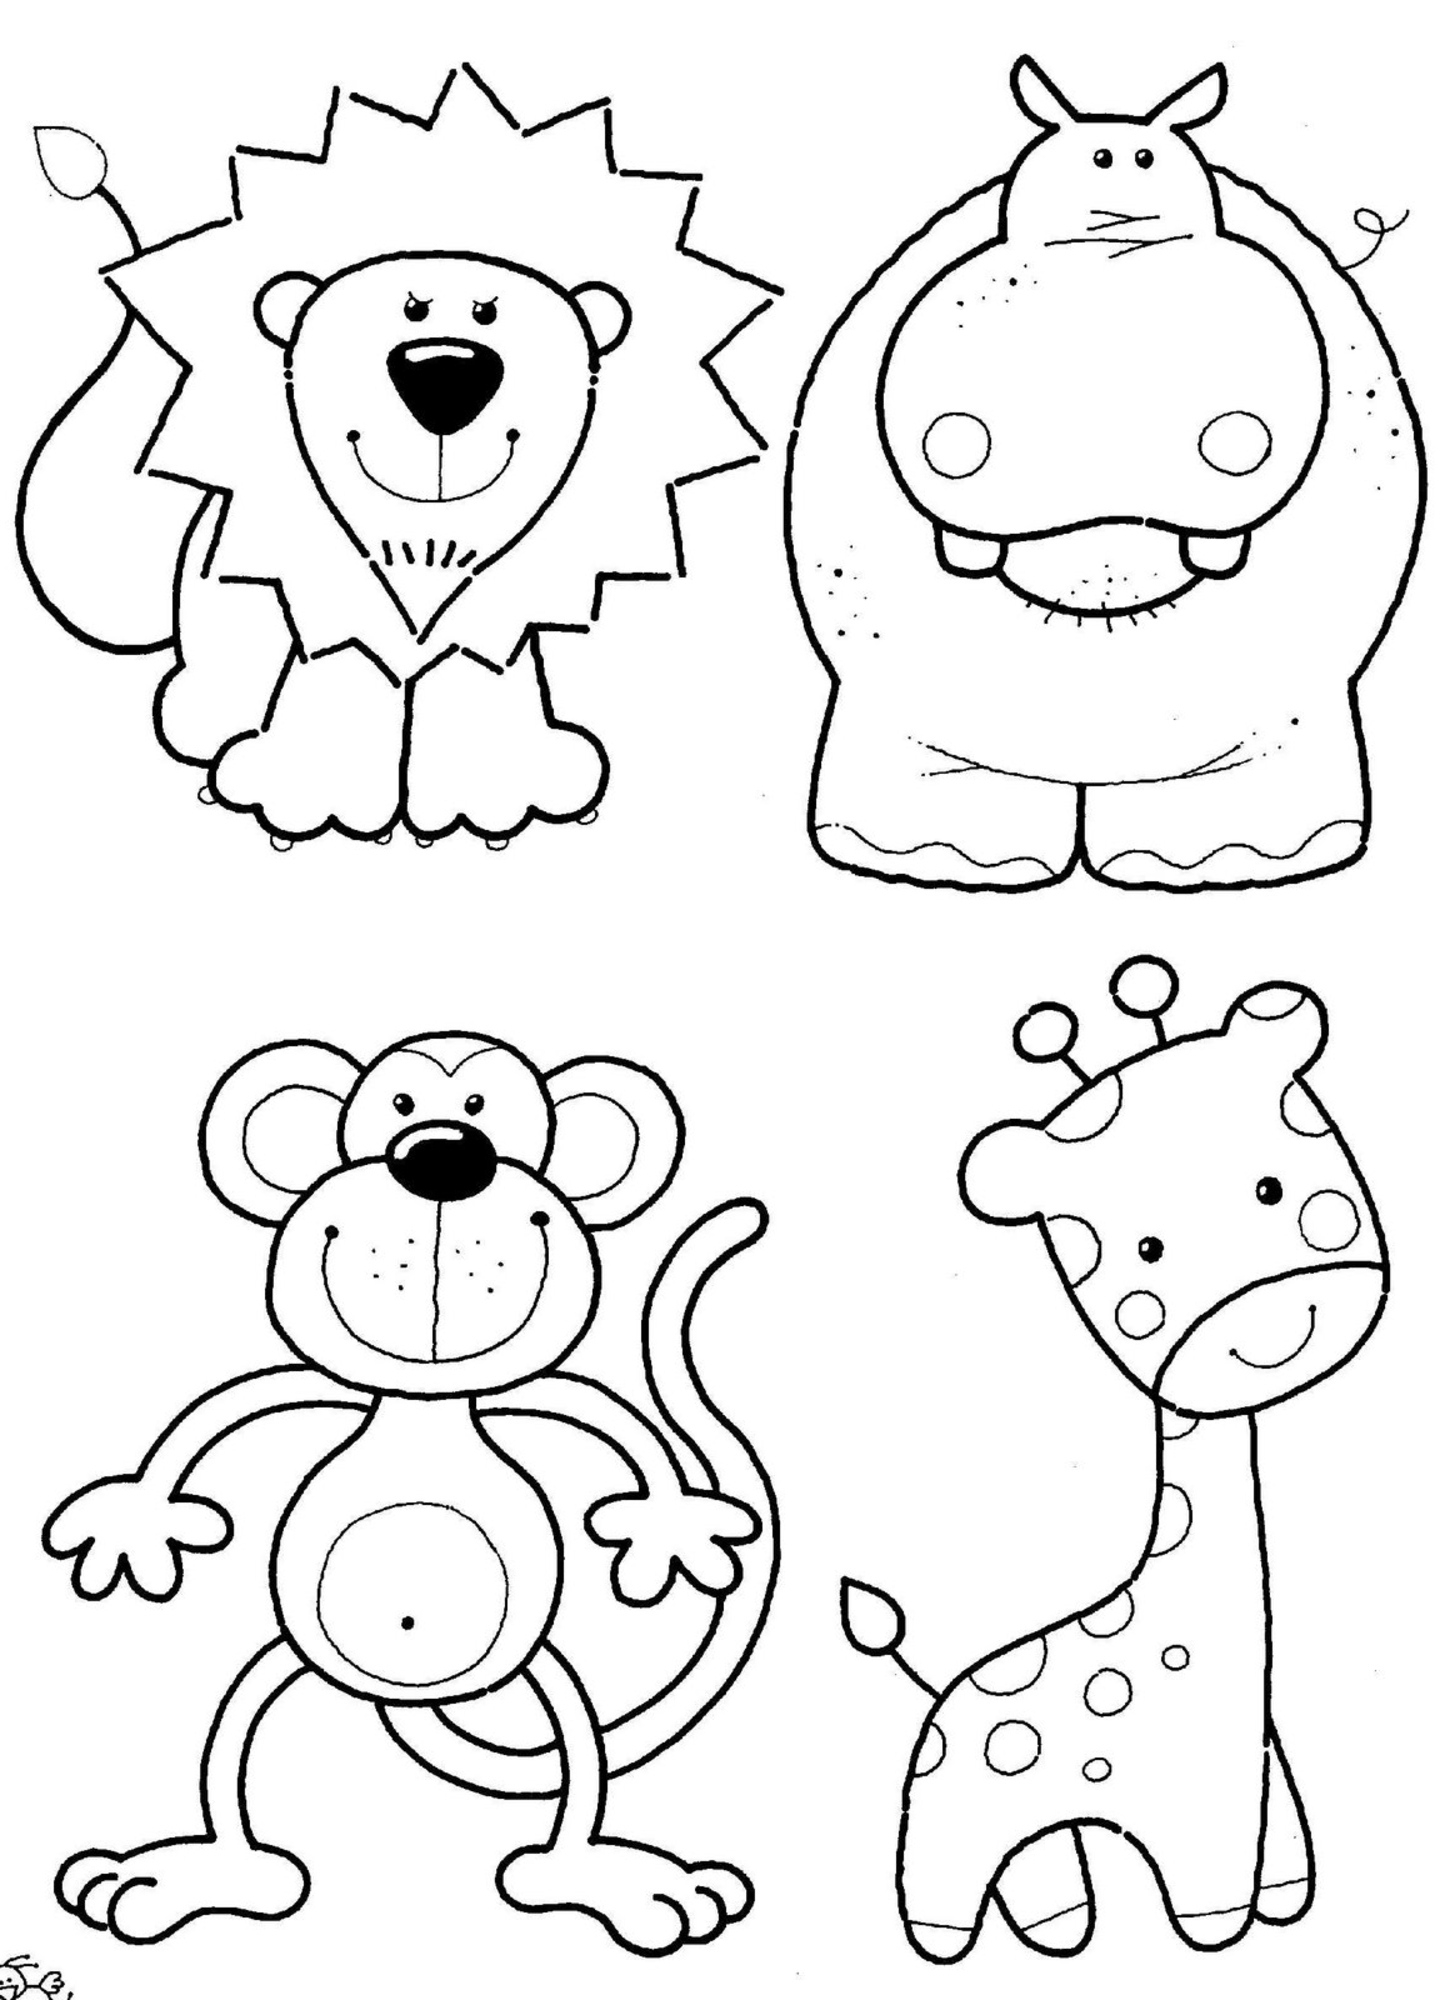 Zoo Coloring Pages For Preschoolers at GetColorings.com   Free ...